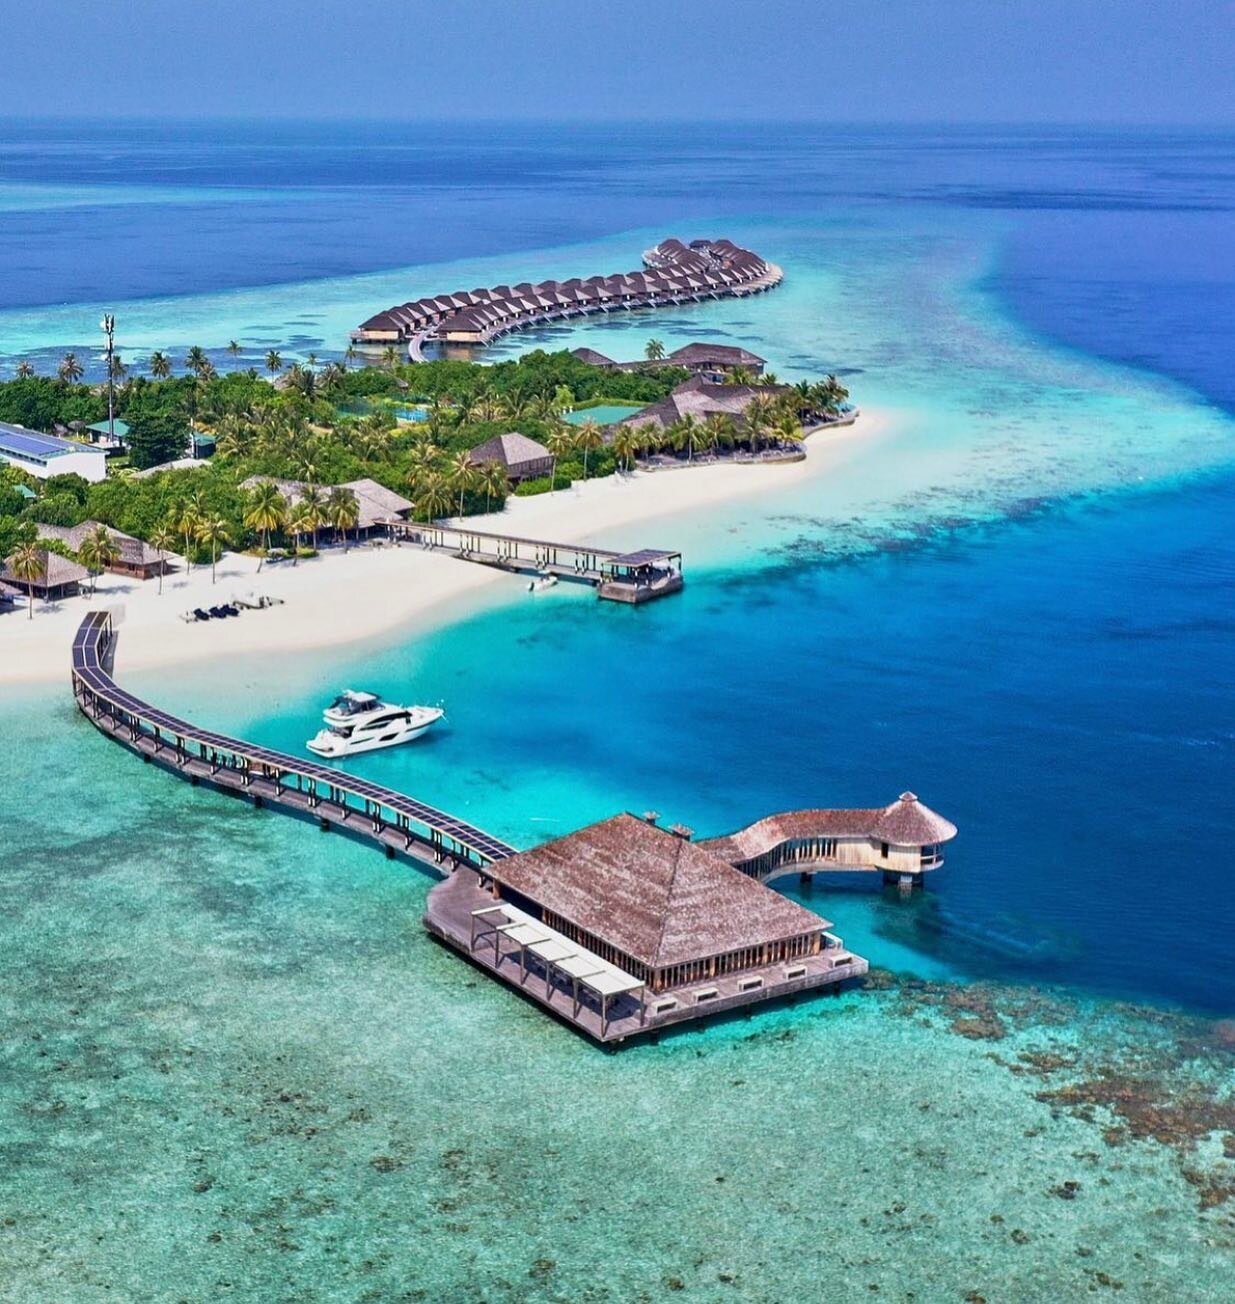 Set on an enchanting private island in the pristine Lhaviyani Atoll in the Maldives, @hurawalhi Island Resort is a perfect match of serenity and excitement, comfort and adventure; it stirs up your every atom with an intricate blend of intimacy and th